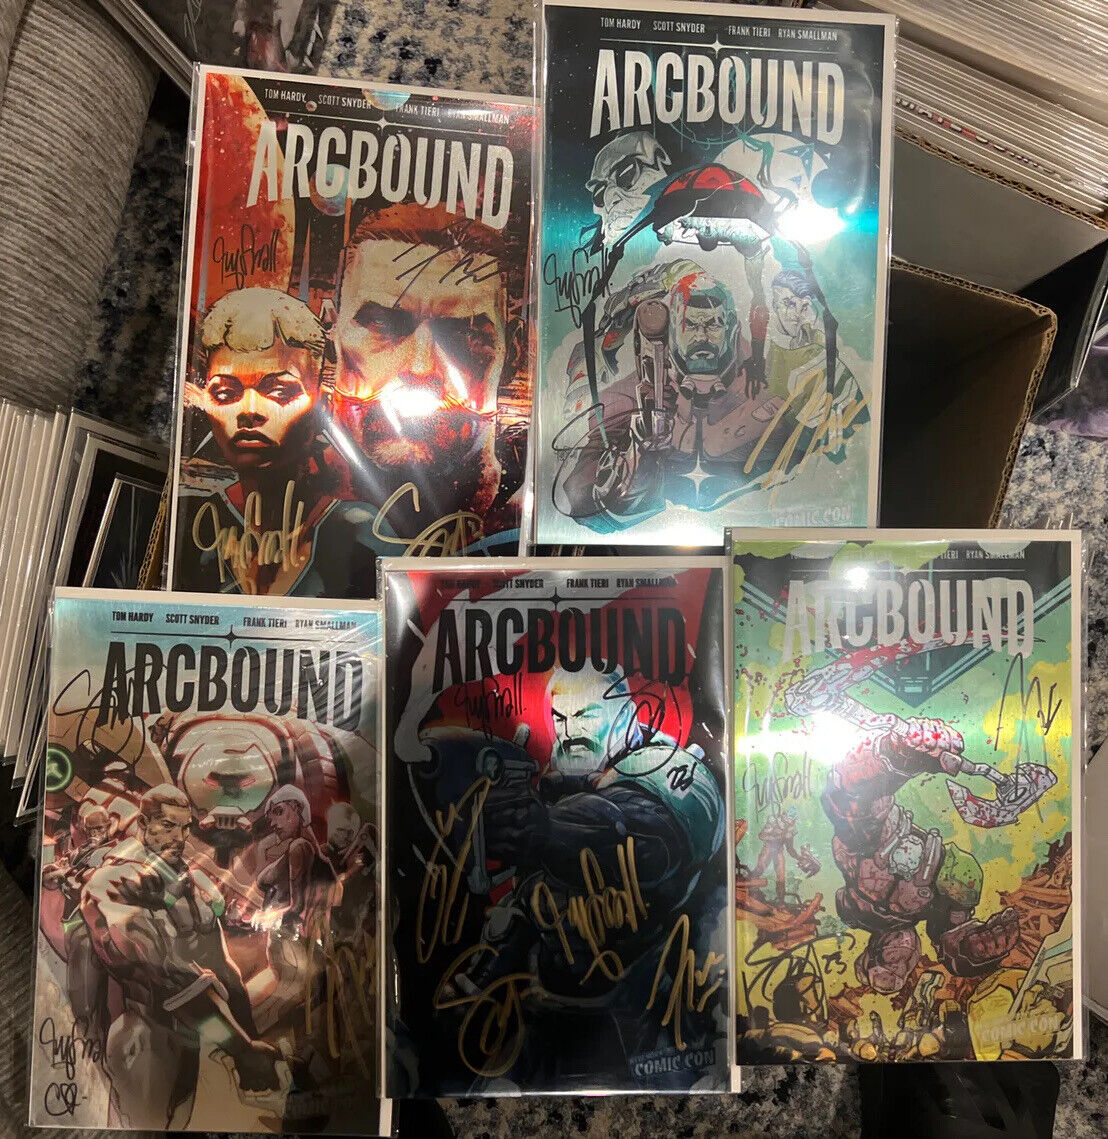 Arcbound #1 Ashcan Metal NYCC Set Signed By Tom Hardy, Scott Snyder, Smallman